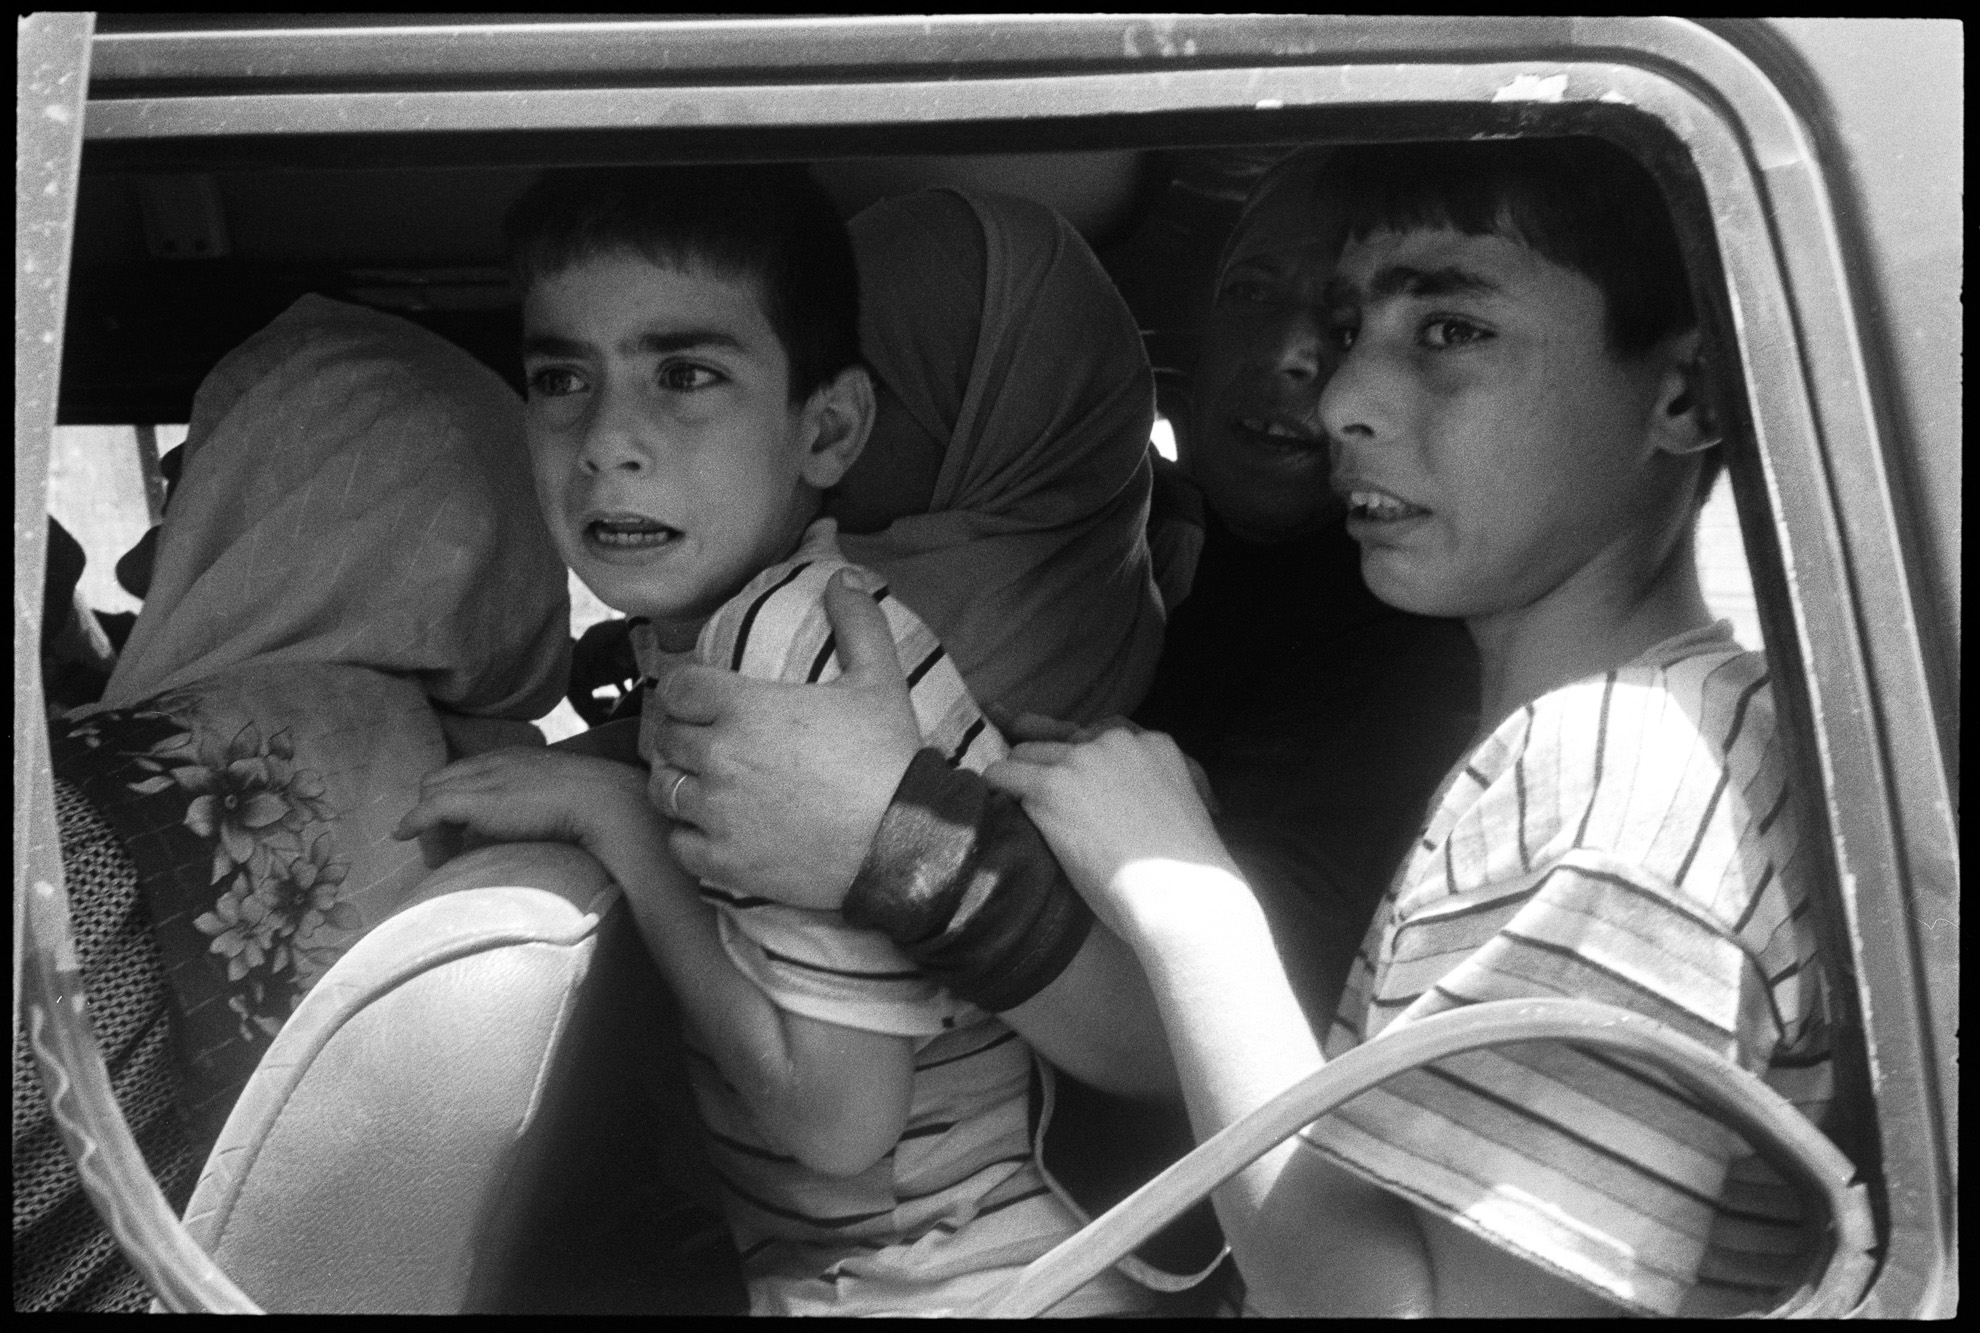 Several families were trapped in their homes for several days while Israeli bombardment flattened many of the surrounding homes. At the time, these brothers feared leaving their father behind in the village, as there were only enough vehicles to evacuate women and children.